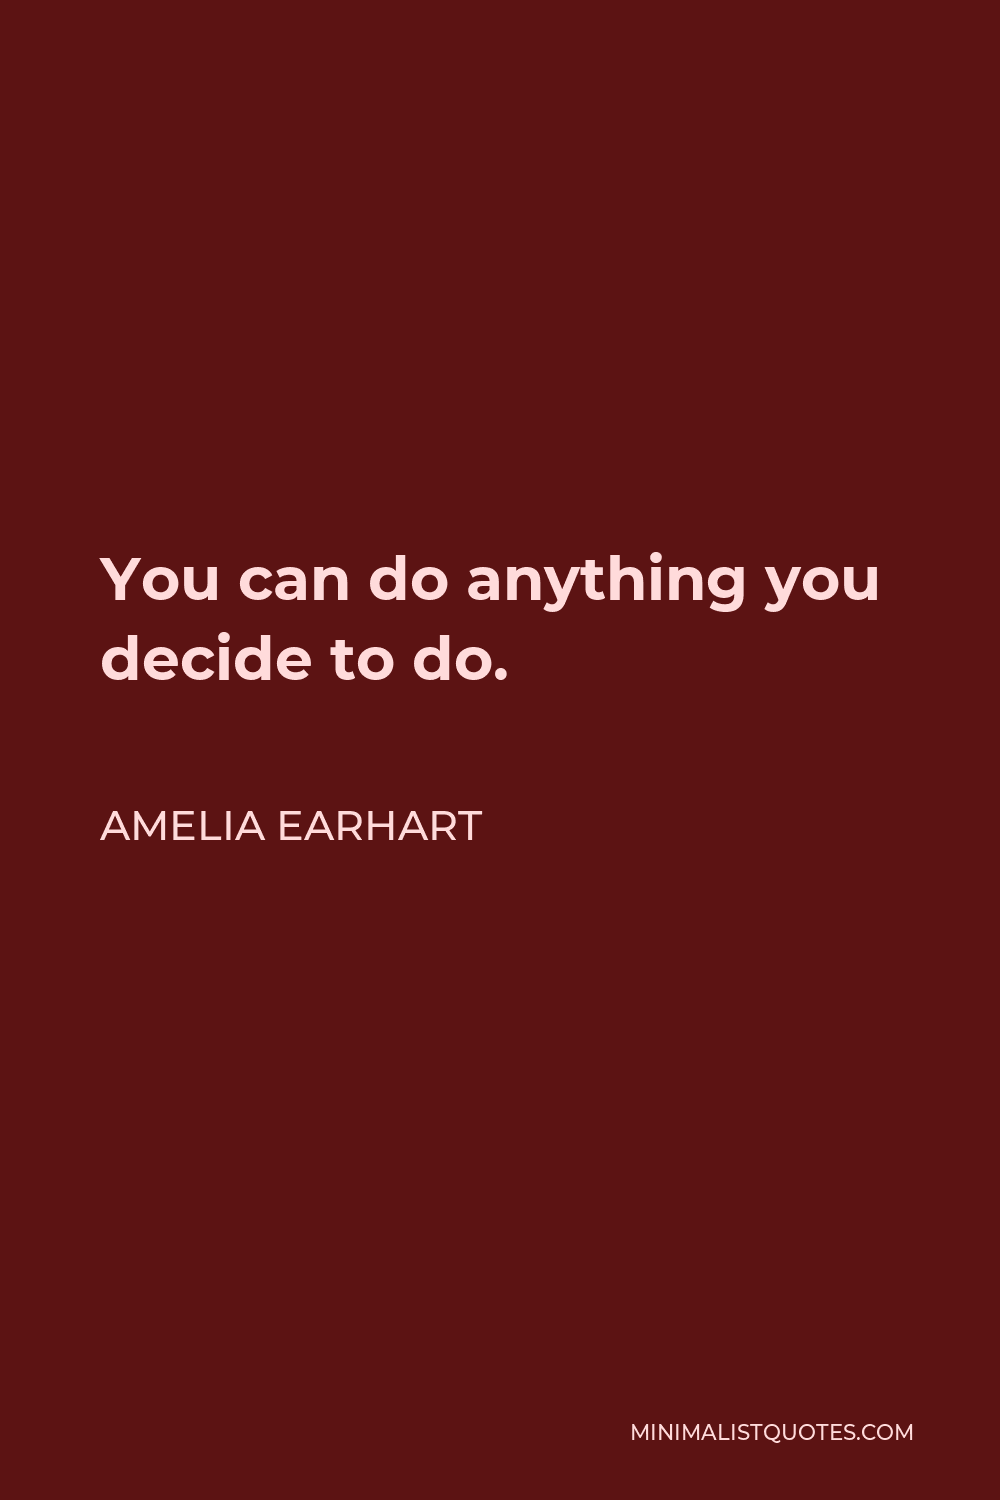 Amelia Earhart Quote: You can do anything you decide to do.